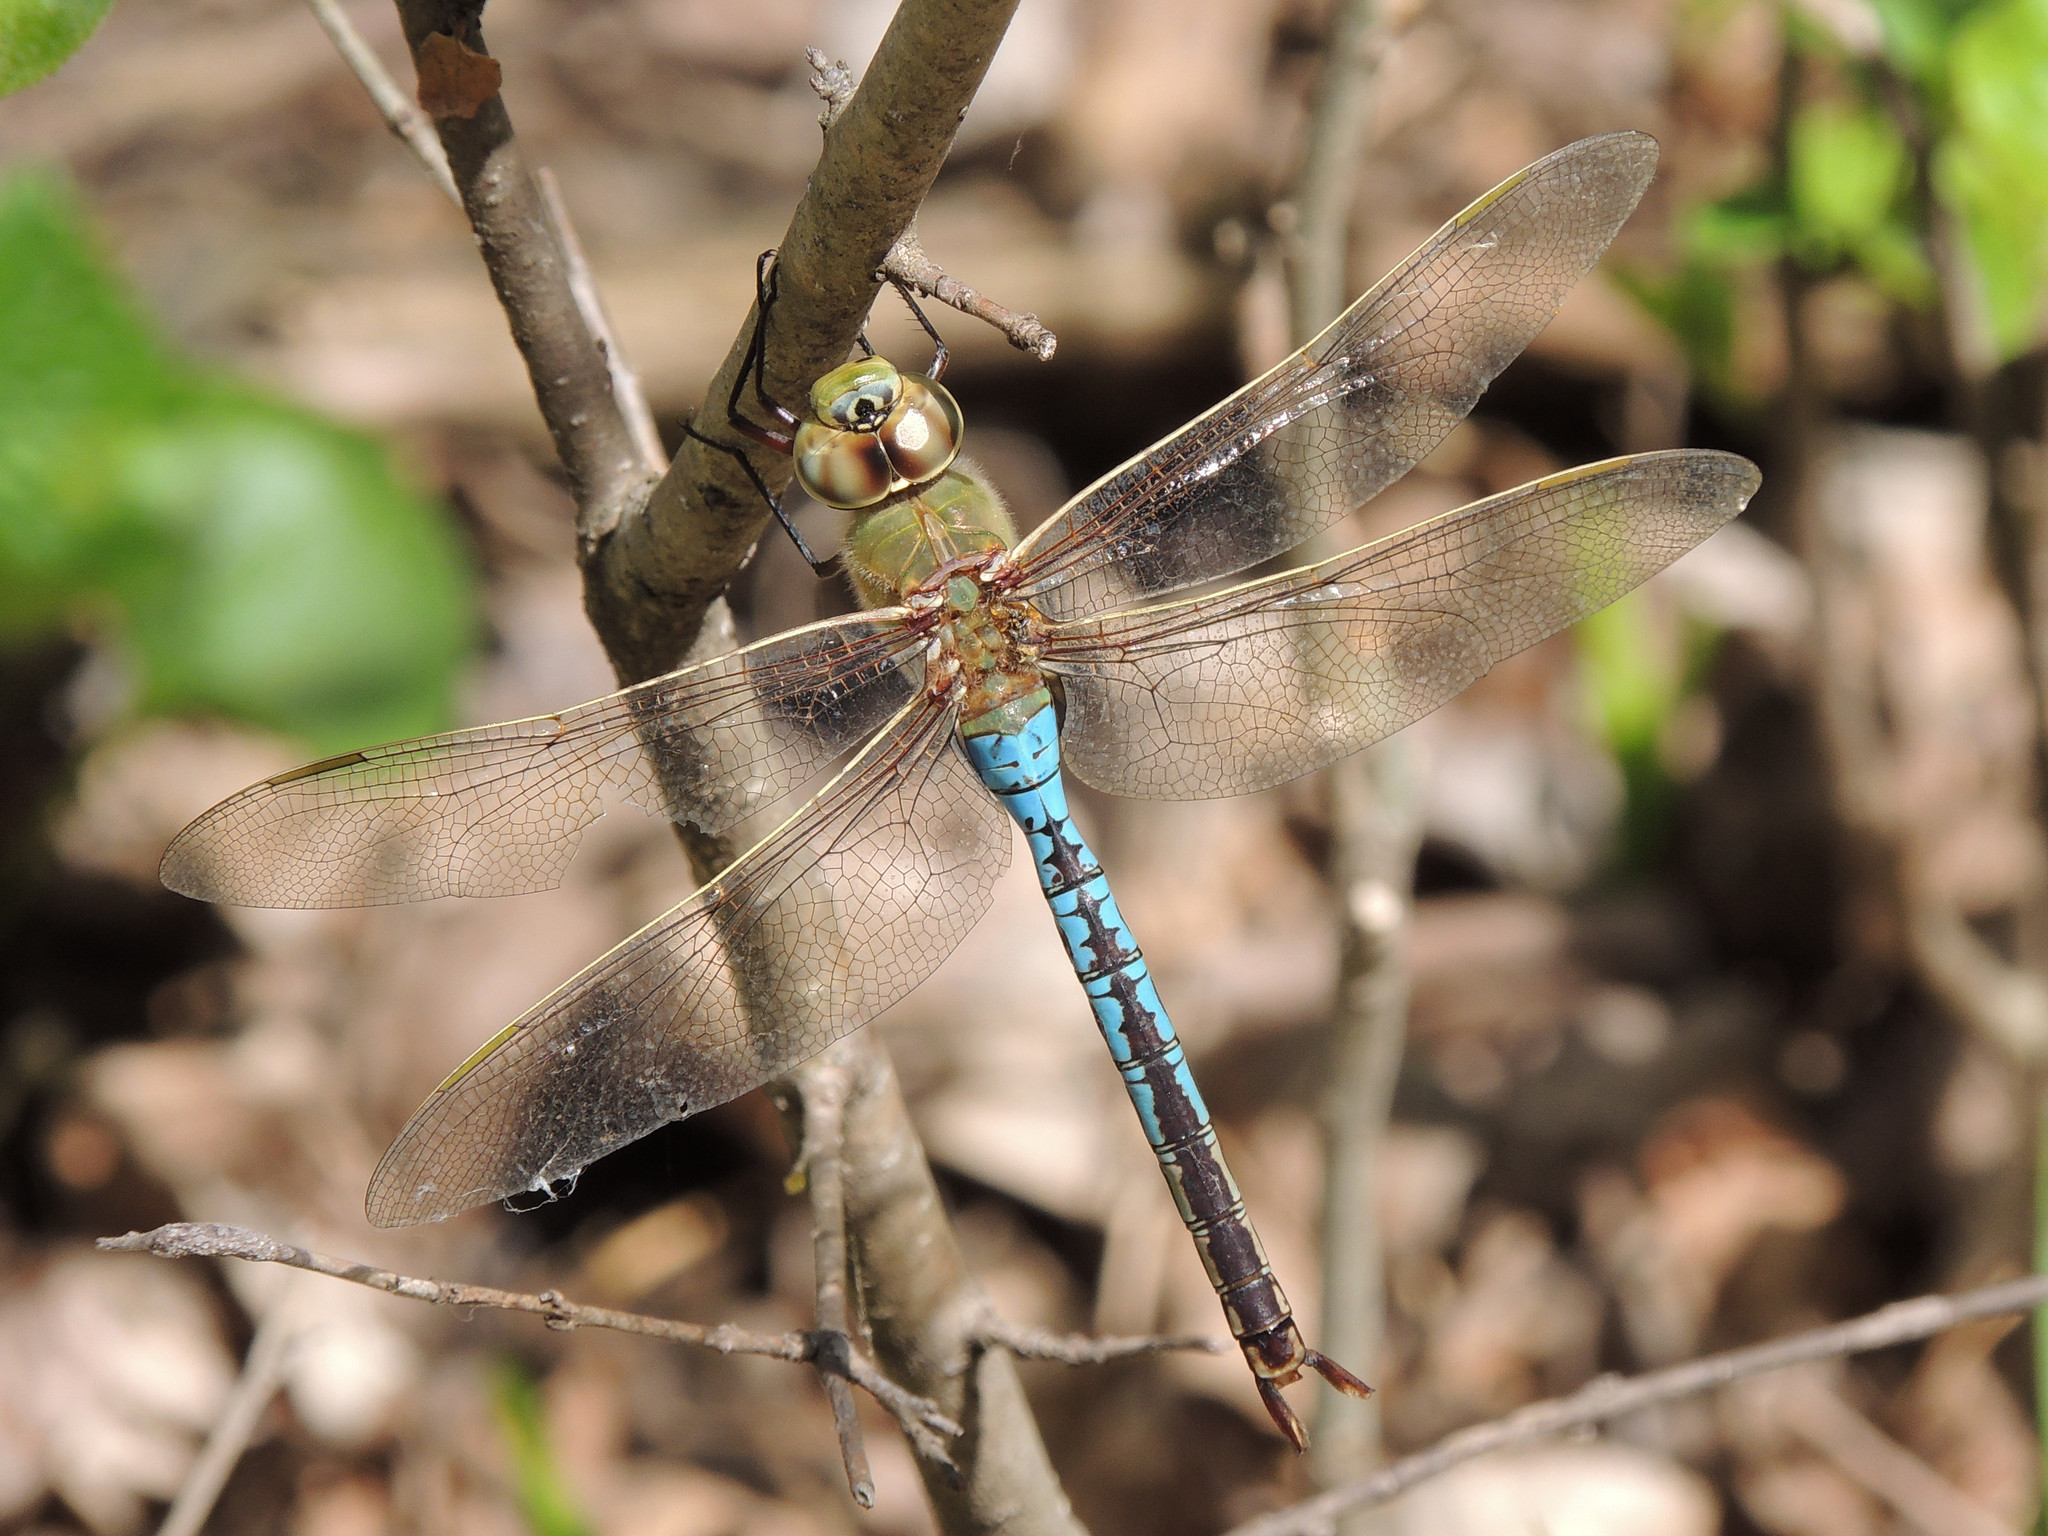 A large dragonfly with four wings that are transparent with black veins. It has large dark eyes, green on its head and thorax, and its abdoment is black and turquoise.